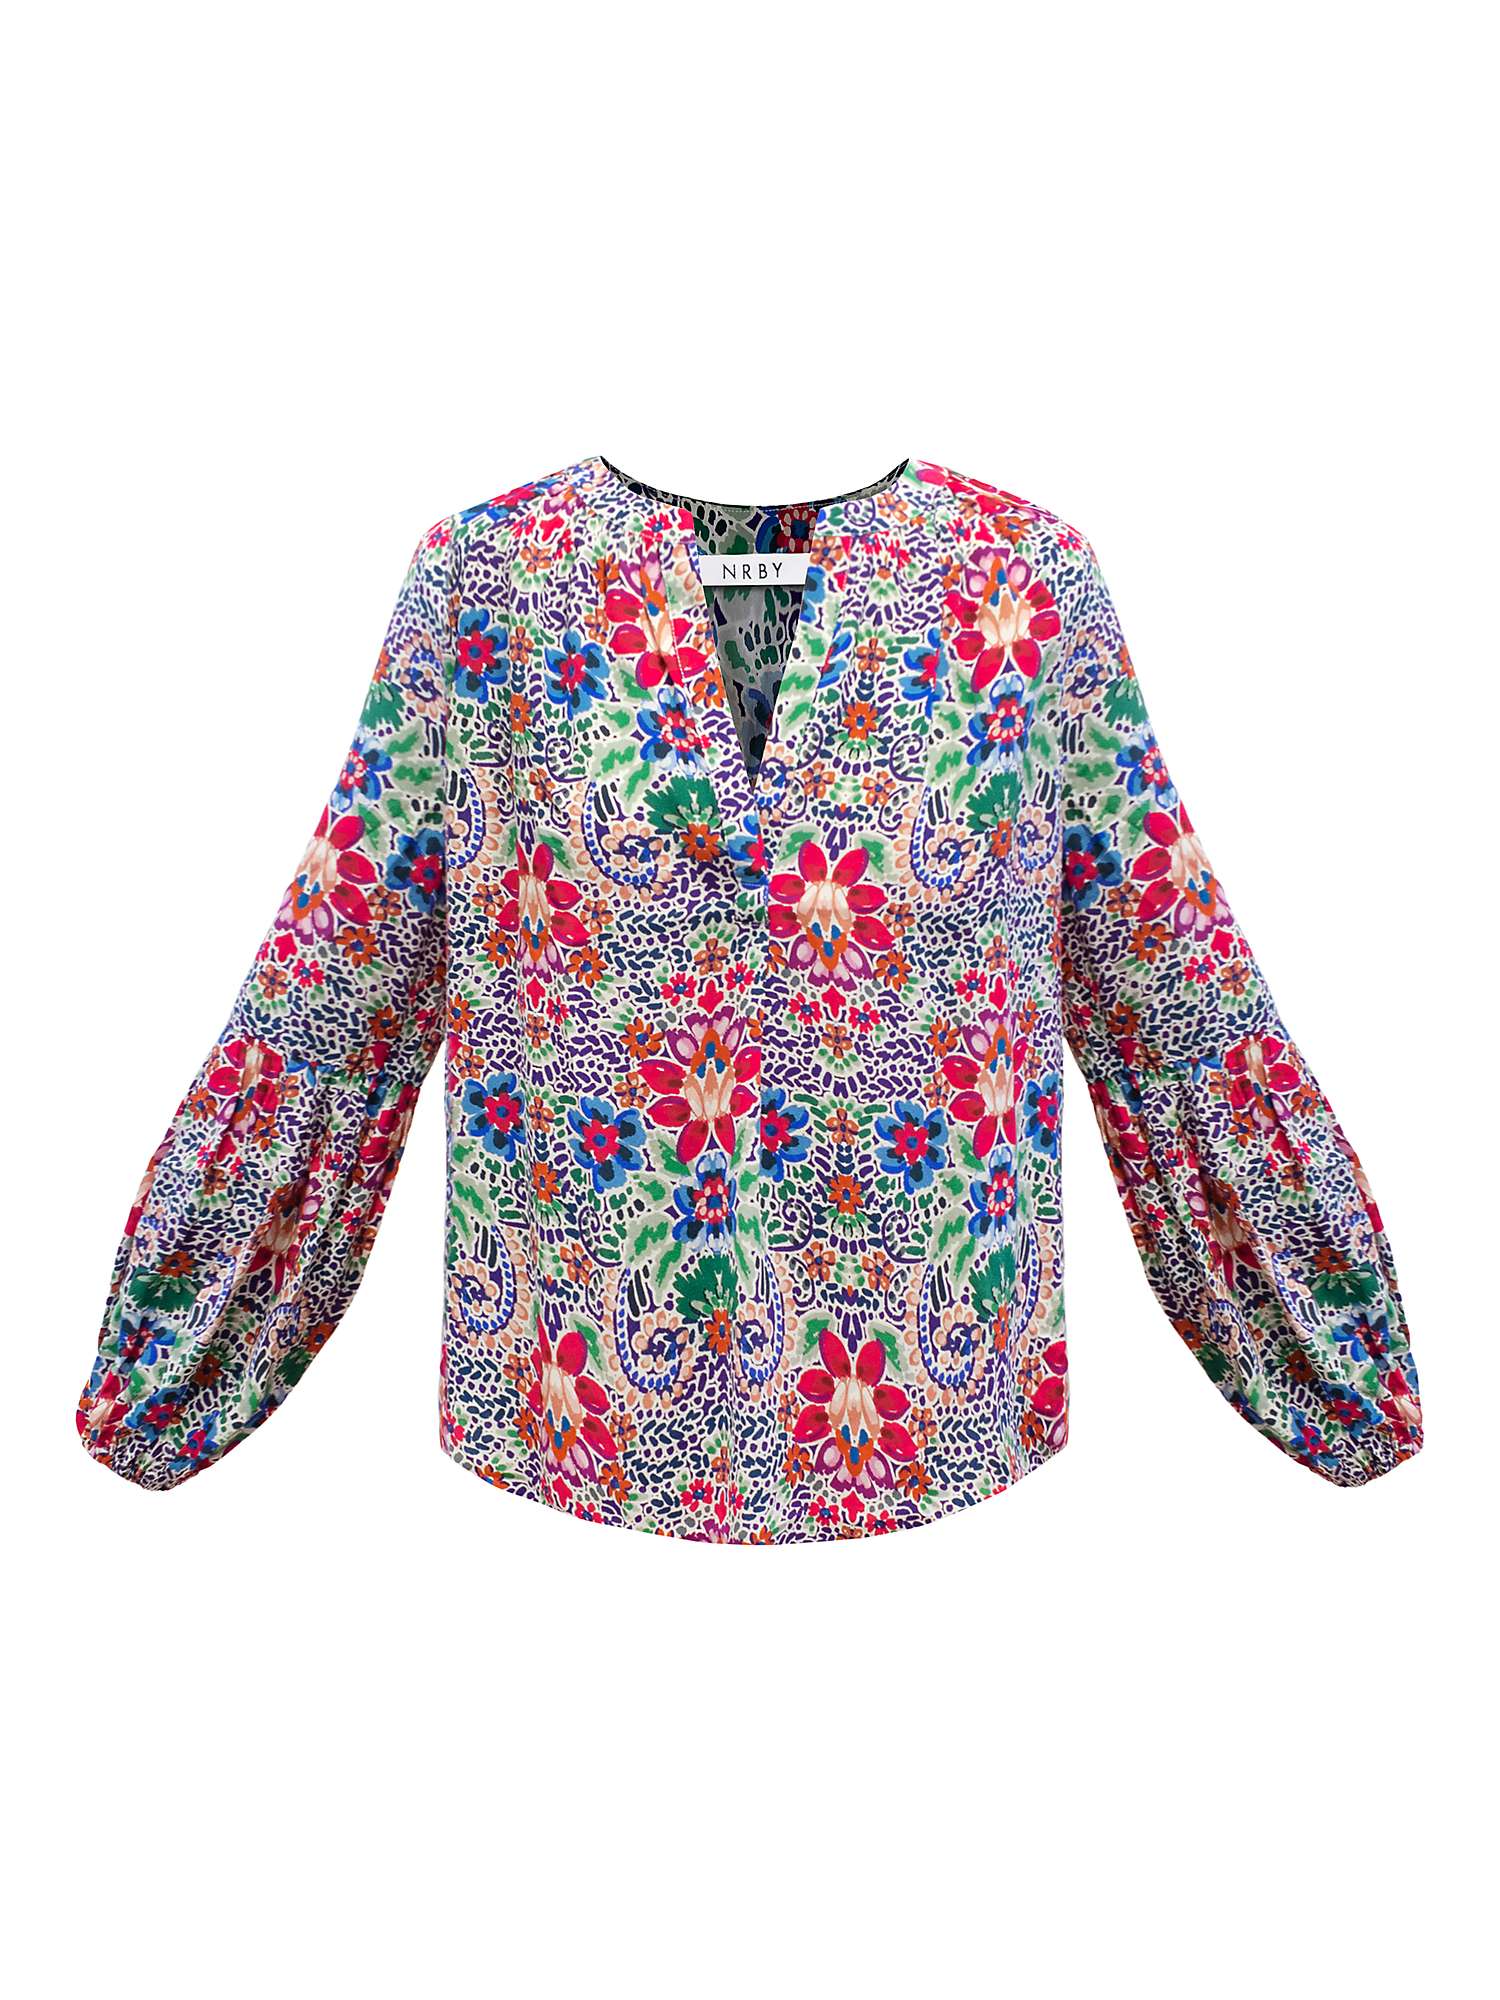 Buy NRBY Ophelia Ikat Print Cotton Blend Blouse, Multi Online at johnlewis.com